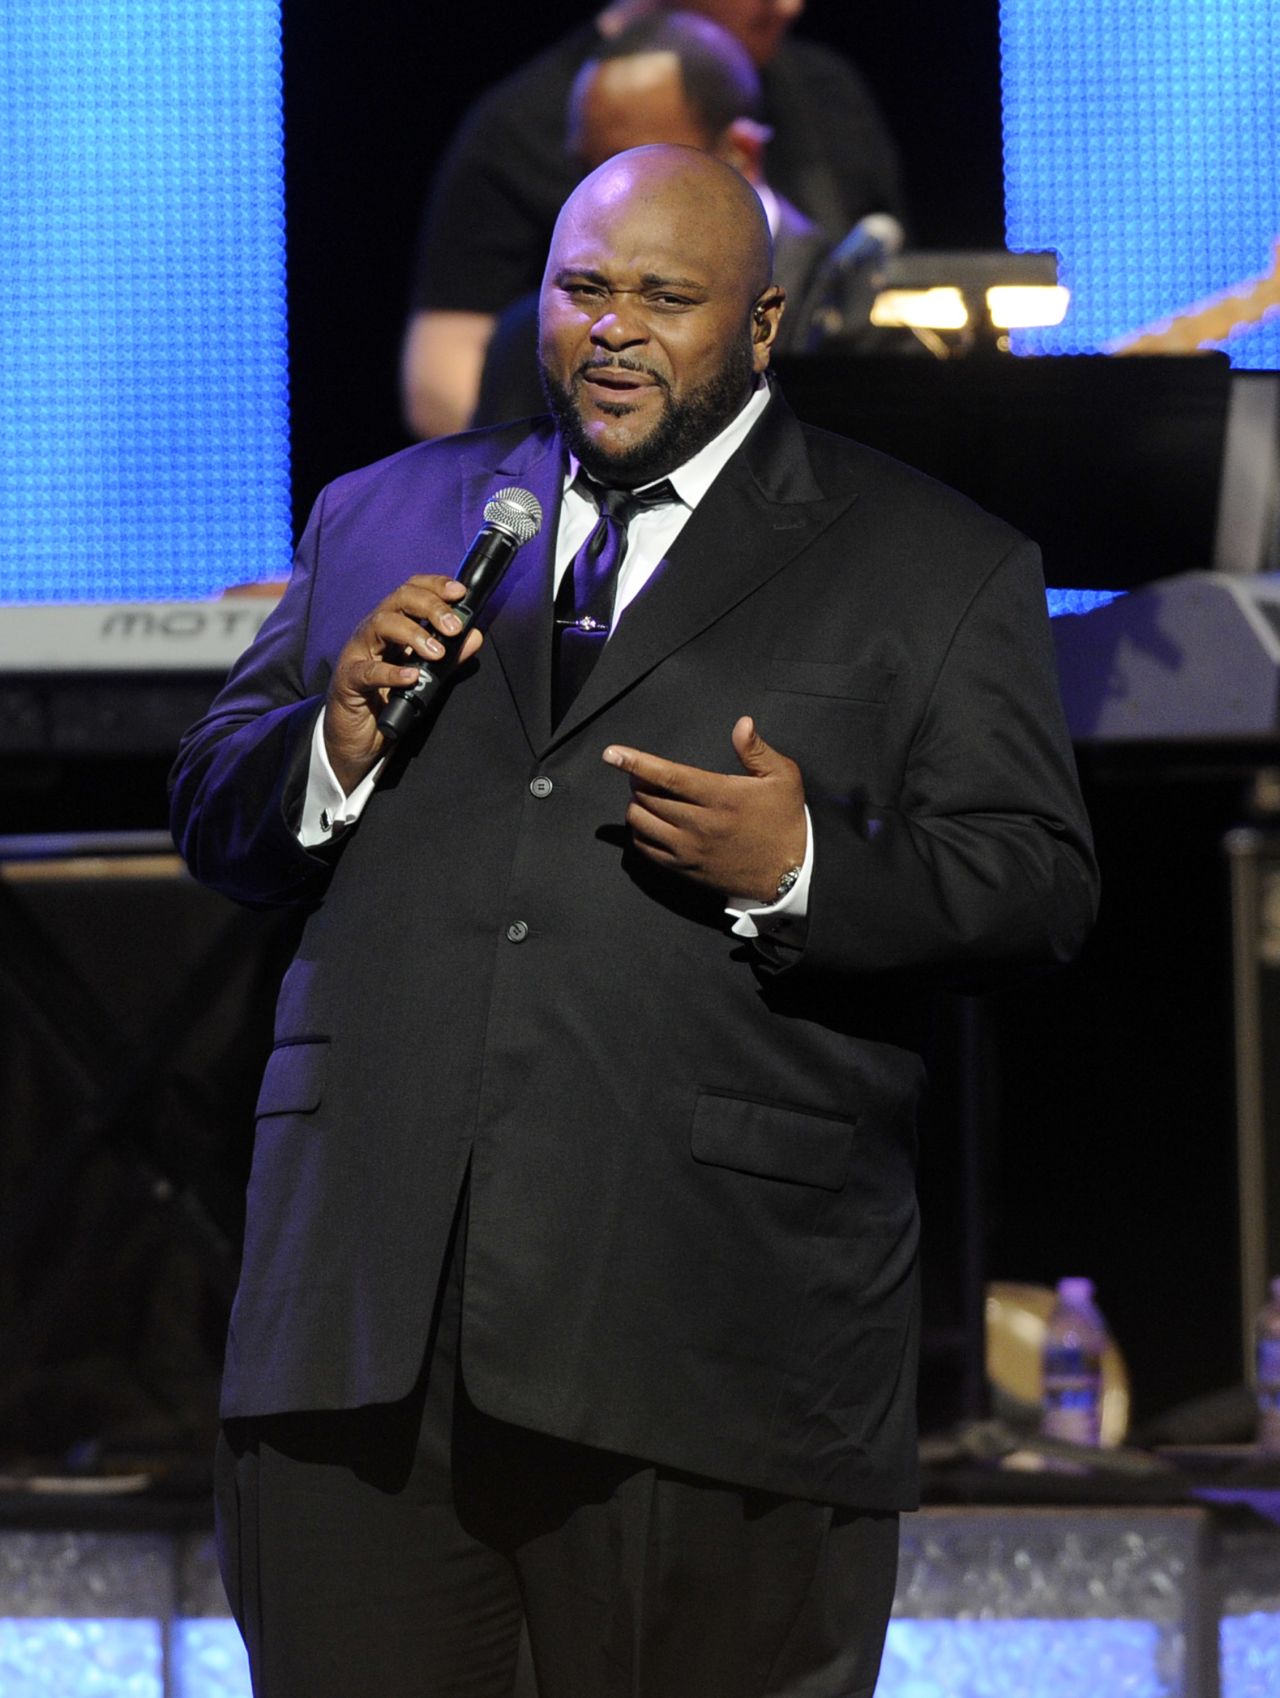 Ruben Studdard was crowned the winner of "American Idol" on season 2, beating Clay Aiken in 2003. His first album, "Soulful," debuted at No. 1 on the Billboard 200 that year. Studdard has since released four more studio albums, gotten divorced <a href="http://www.al.com/entertainment/index.ssf/2014/03/alabama_idol_ruben_studdard_re.html" target="_blank" target="_blank">and shed weight on "The Biggest Loser."</a> In December 2015, Studdard received <a href="http://www.theroot.com/blogs/the_grapevine/2015/12/ruben_studdard_graduates_with_master_of_arts_degree_from_alabama_a_m.html" target="_blank" target="_blank">an honorary master's degree from Alabama A&M University. </a>